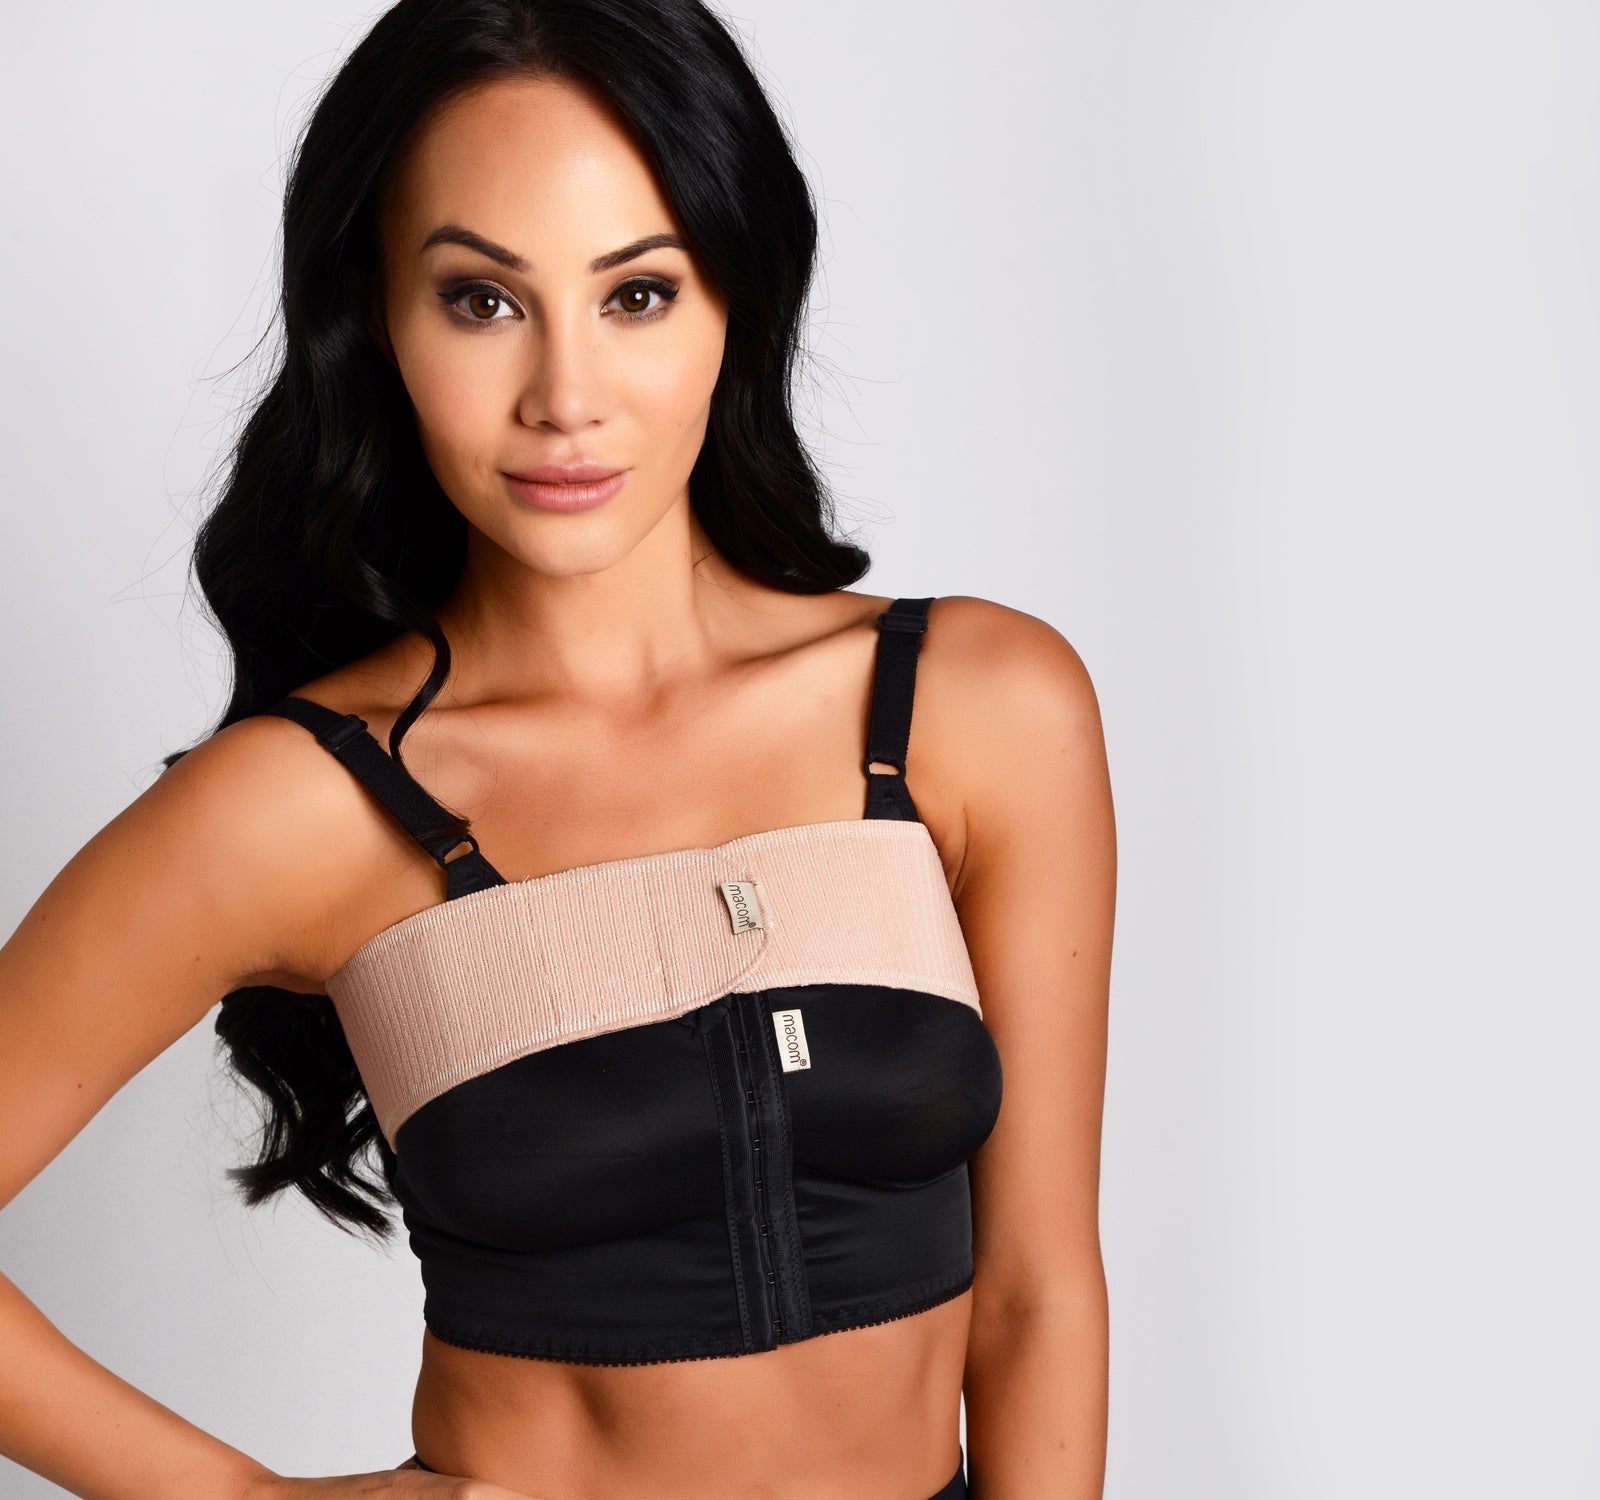 Our MACOM Signature bra will be ideal for any breast surgery may